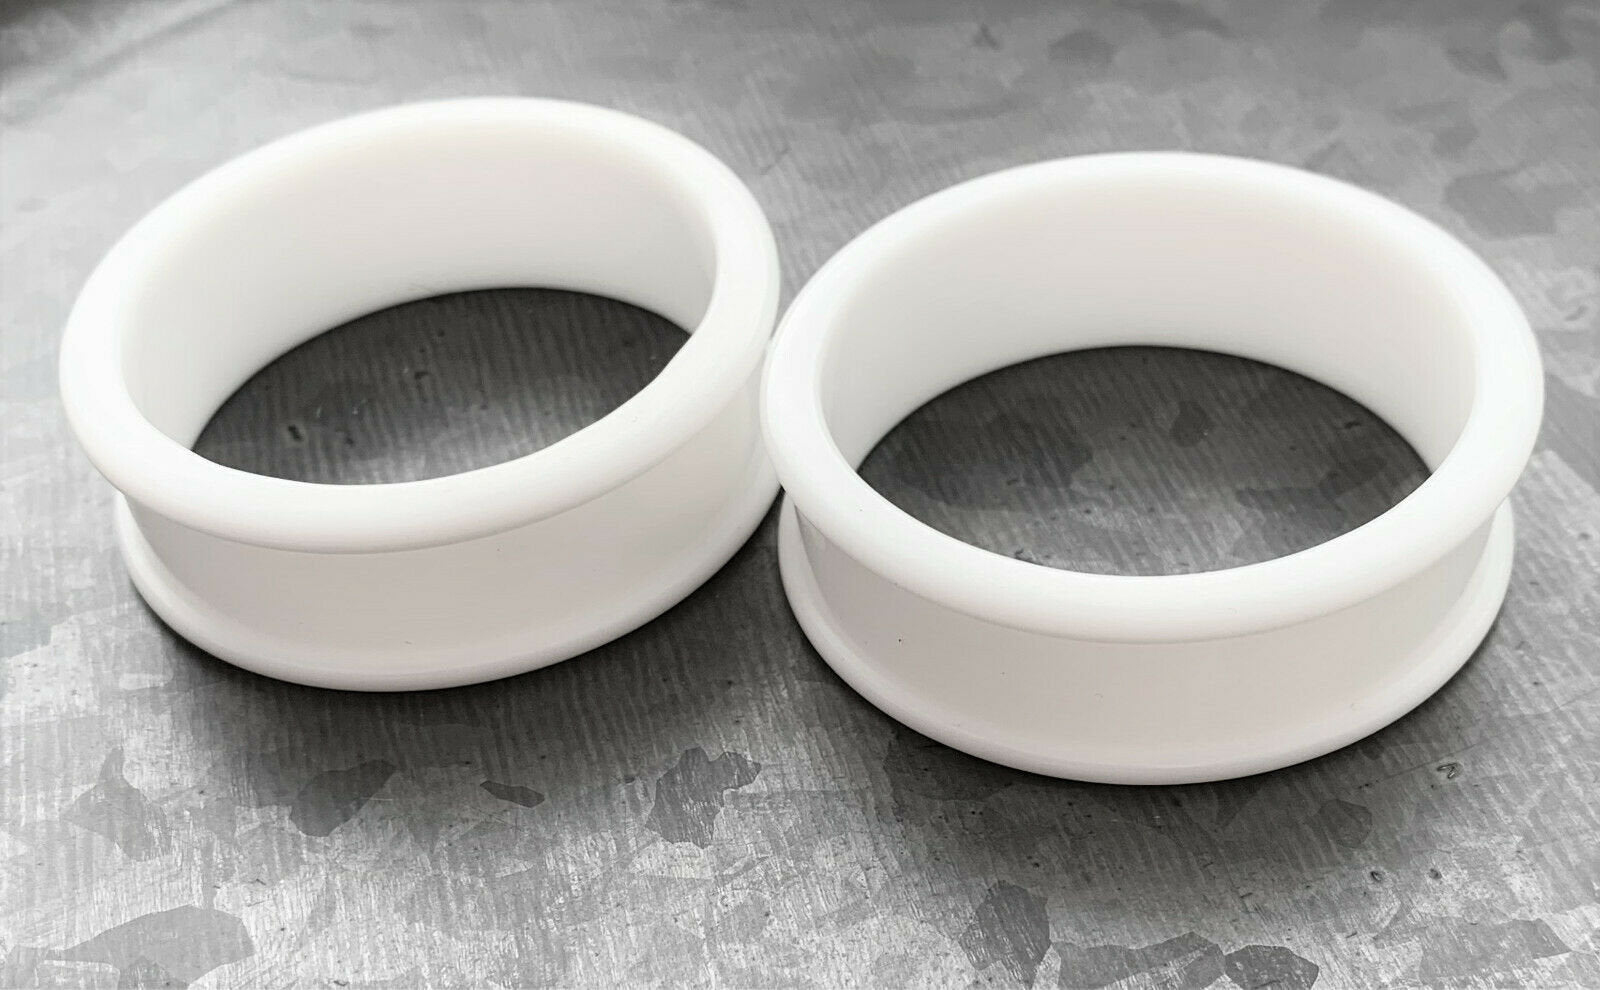 PAIR of Brilliant Bright White Silicone Double Flare Tunnels - Gauges 2g (6mm) up to 2" (51mm) available!